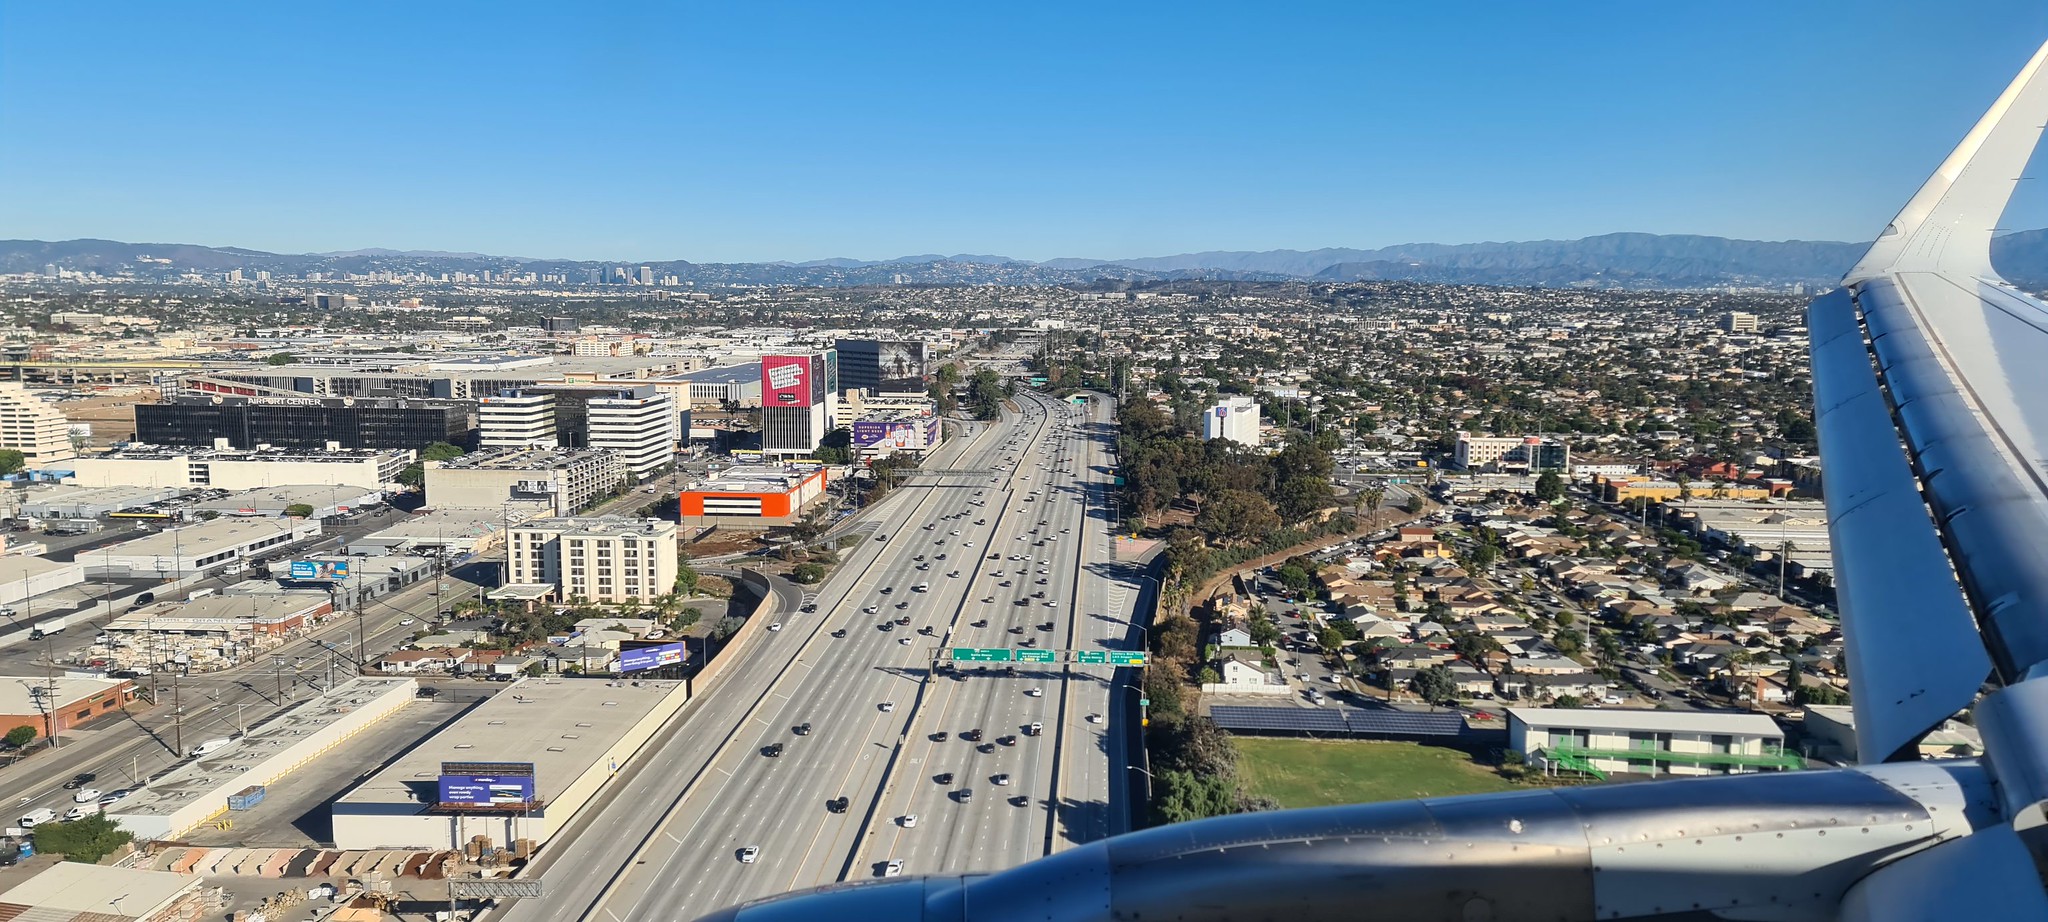 On final approach into Los Angeles LAX